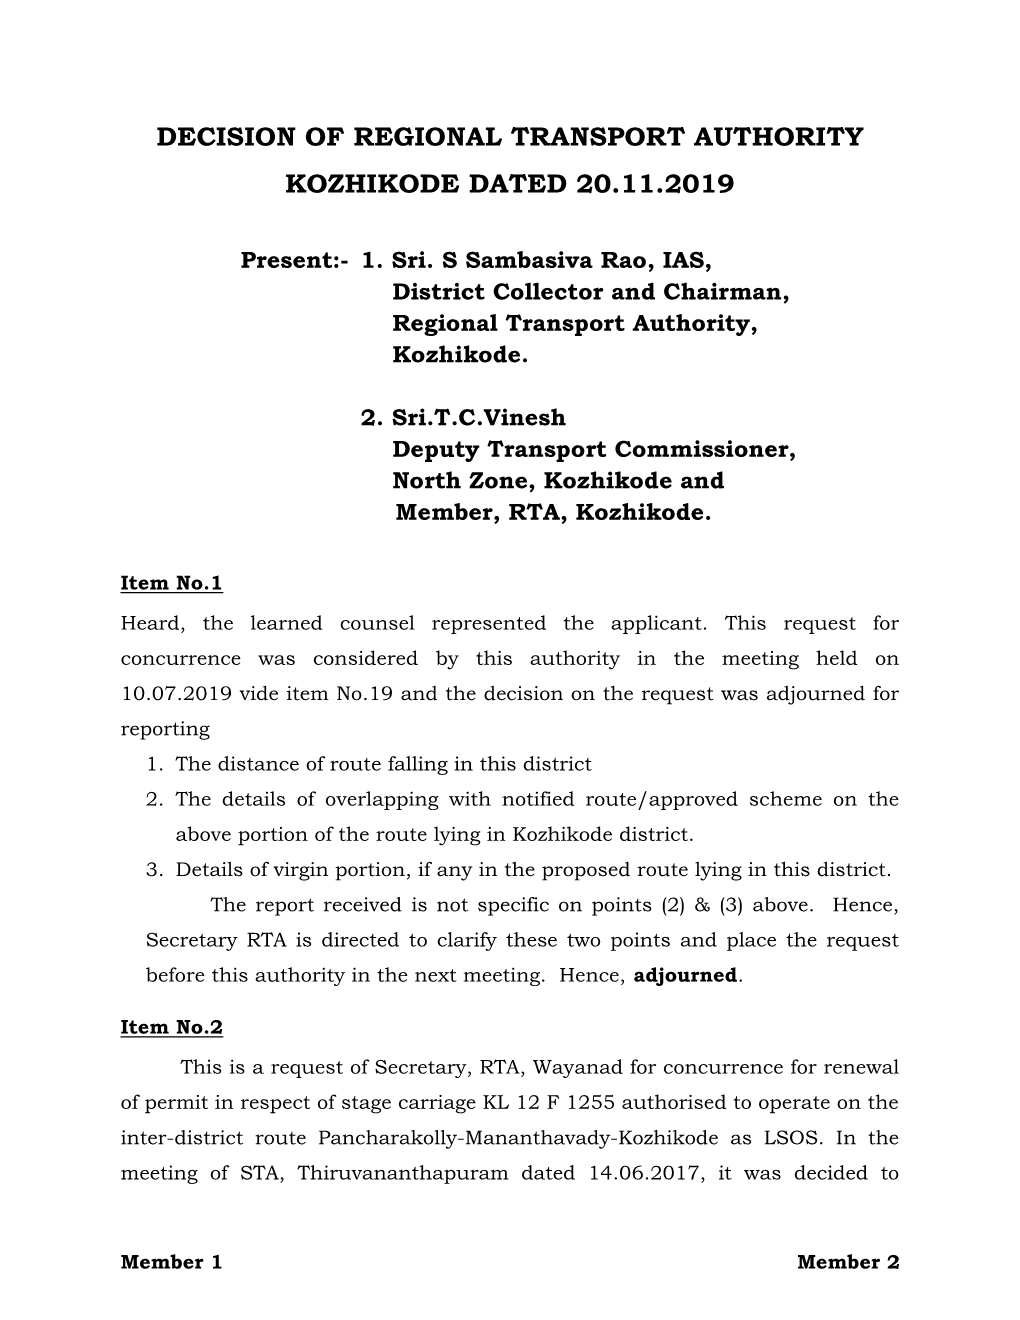 Decision of Regional Transport Authority Kozhikode Dated 20.11.2019